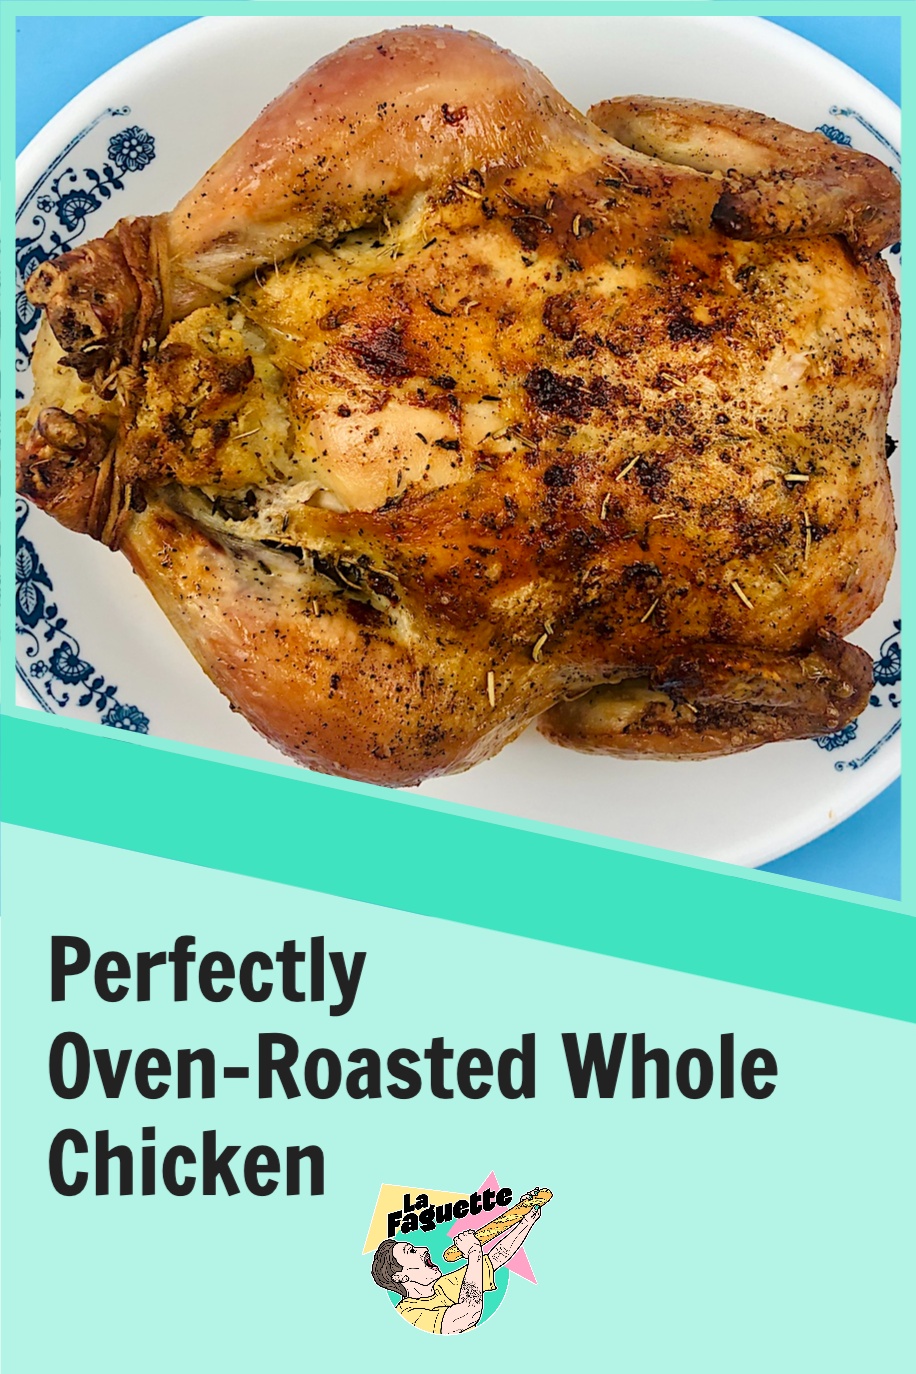 Perfectly Oven-Roasted Whole Chicken - La Faguette